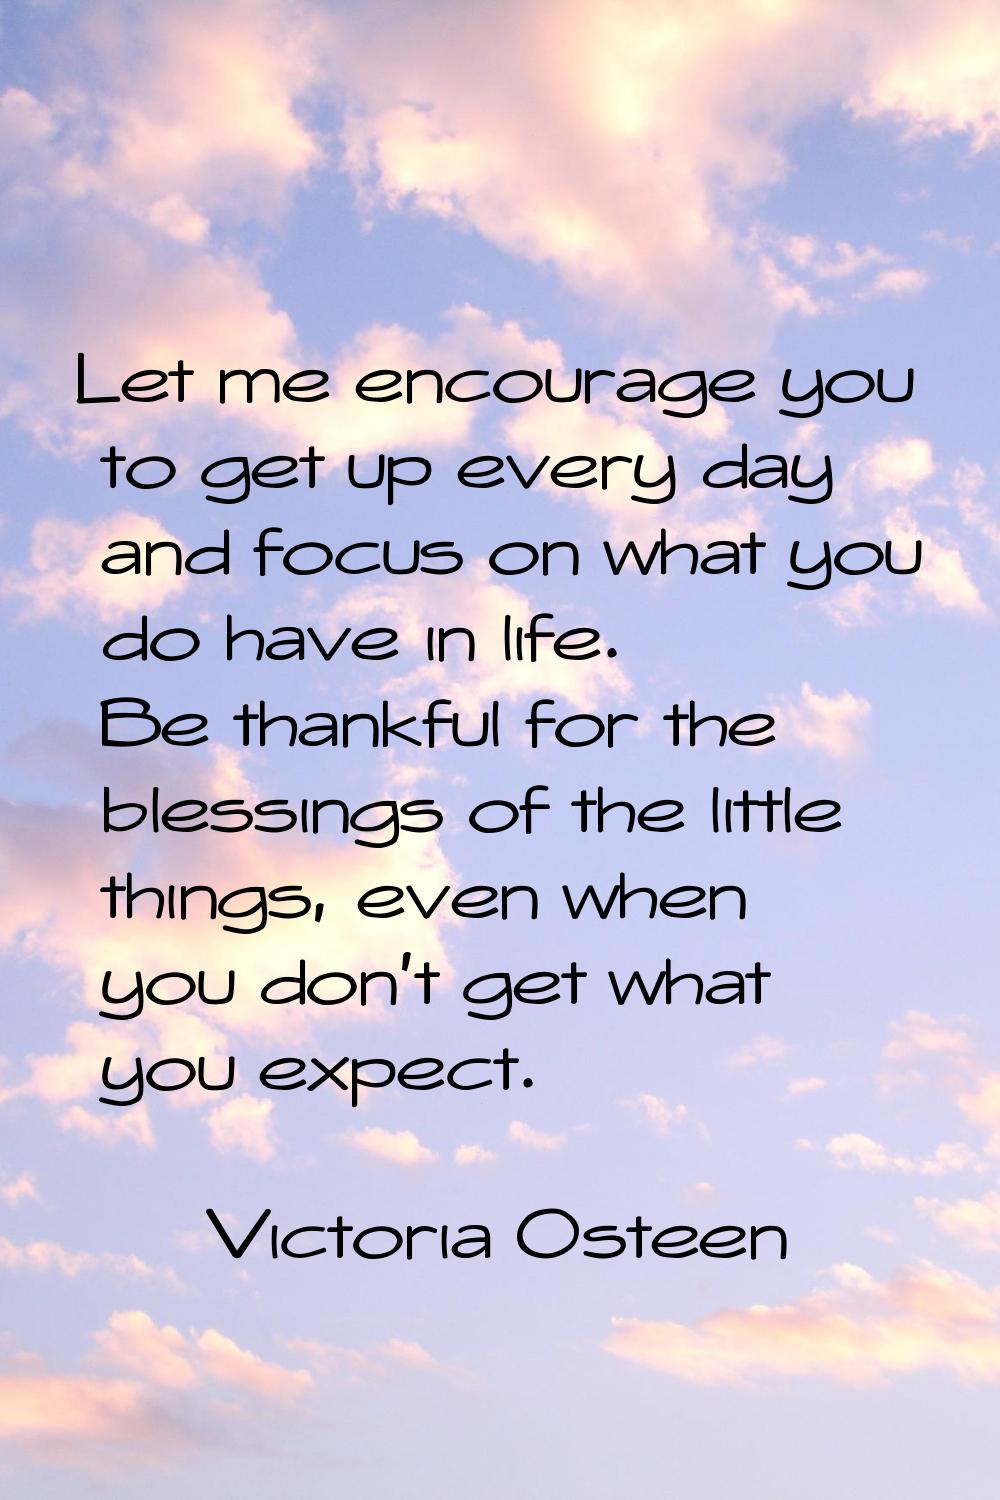 Let me encourage you to get up every day and focus on what you do have in life. Be thankful for the